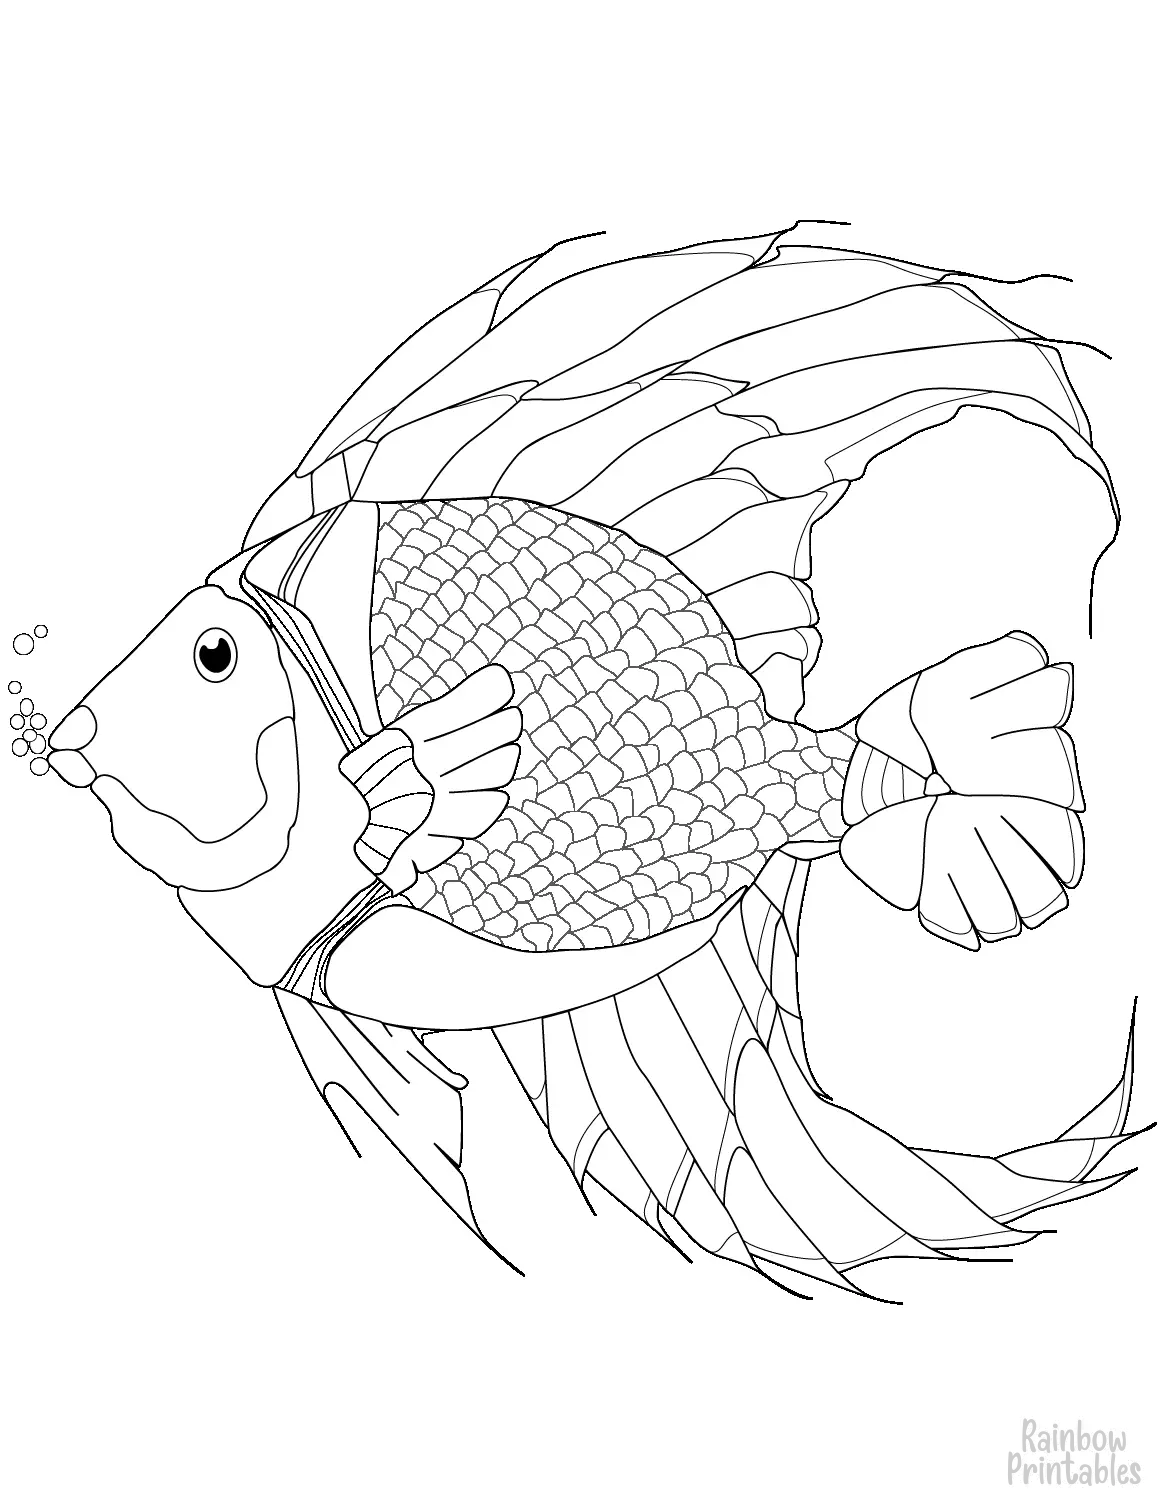 SIMPLE-EASY-line-drawings-FISH-FIN-Scales-coloring-page-for-kids